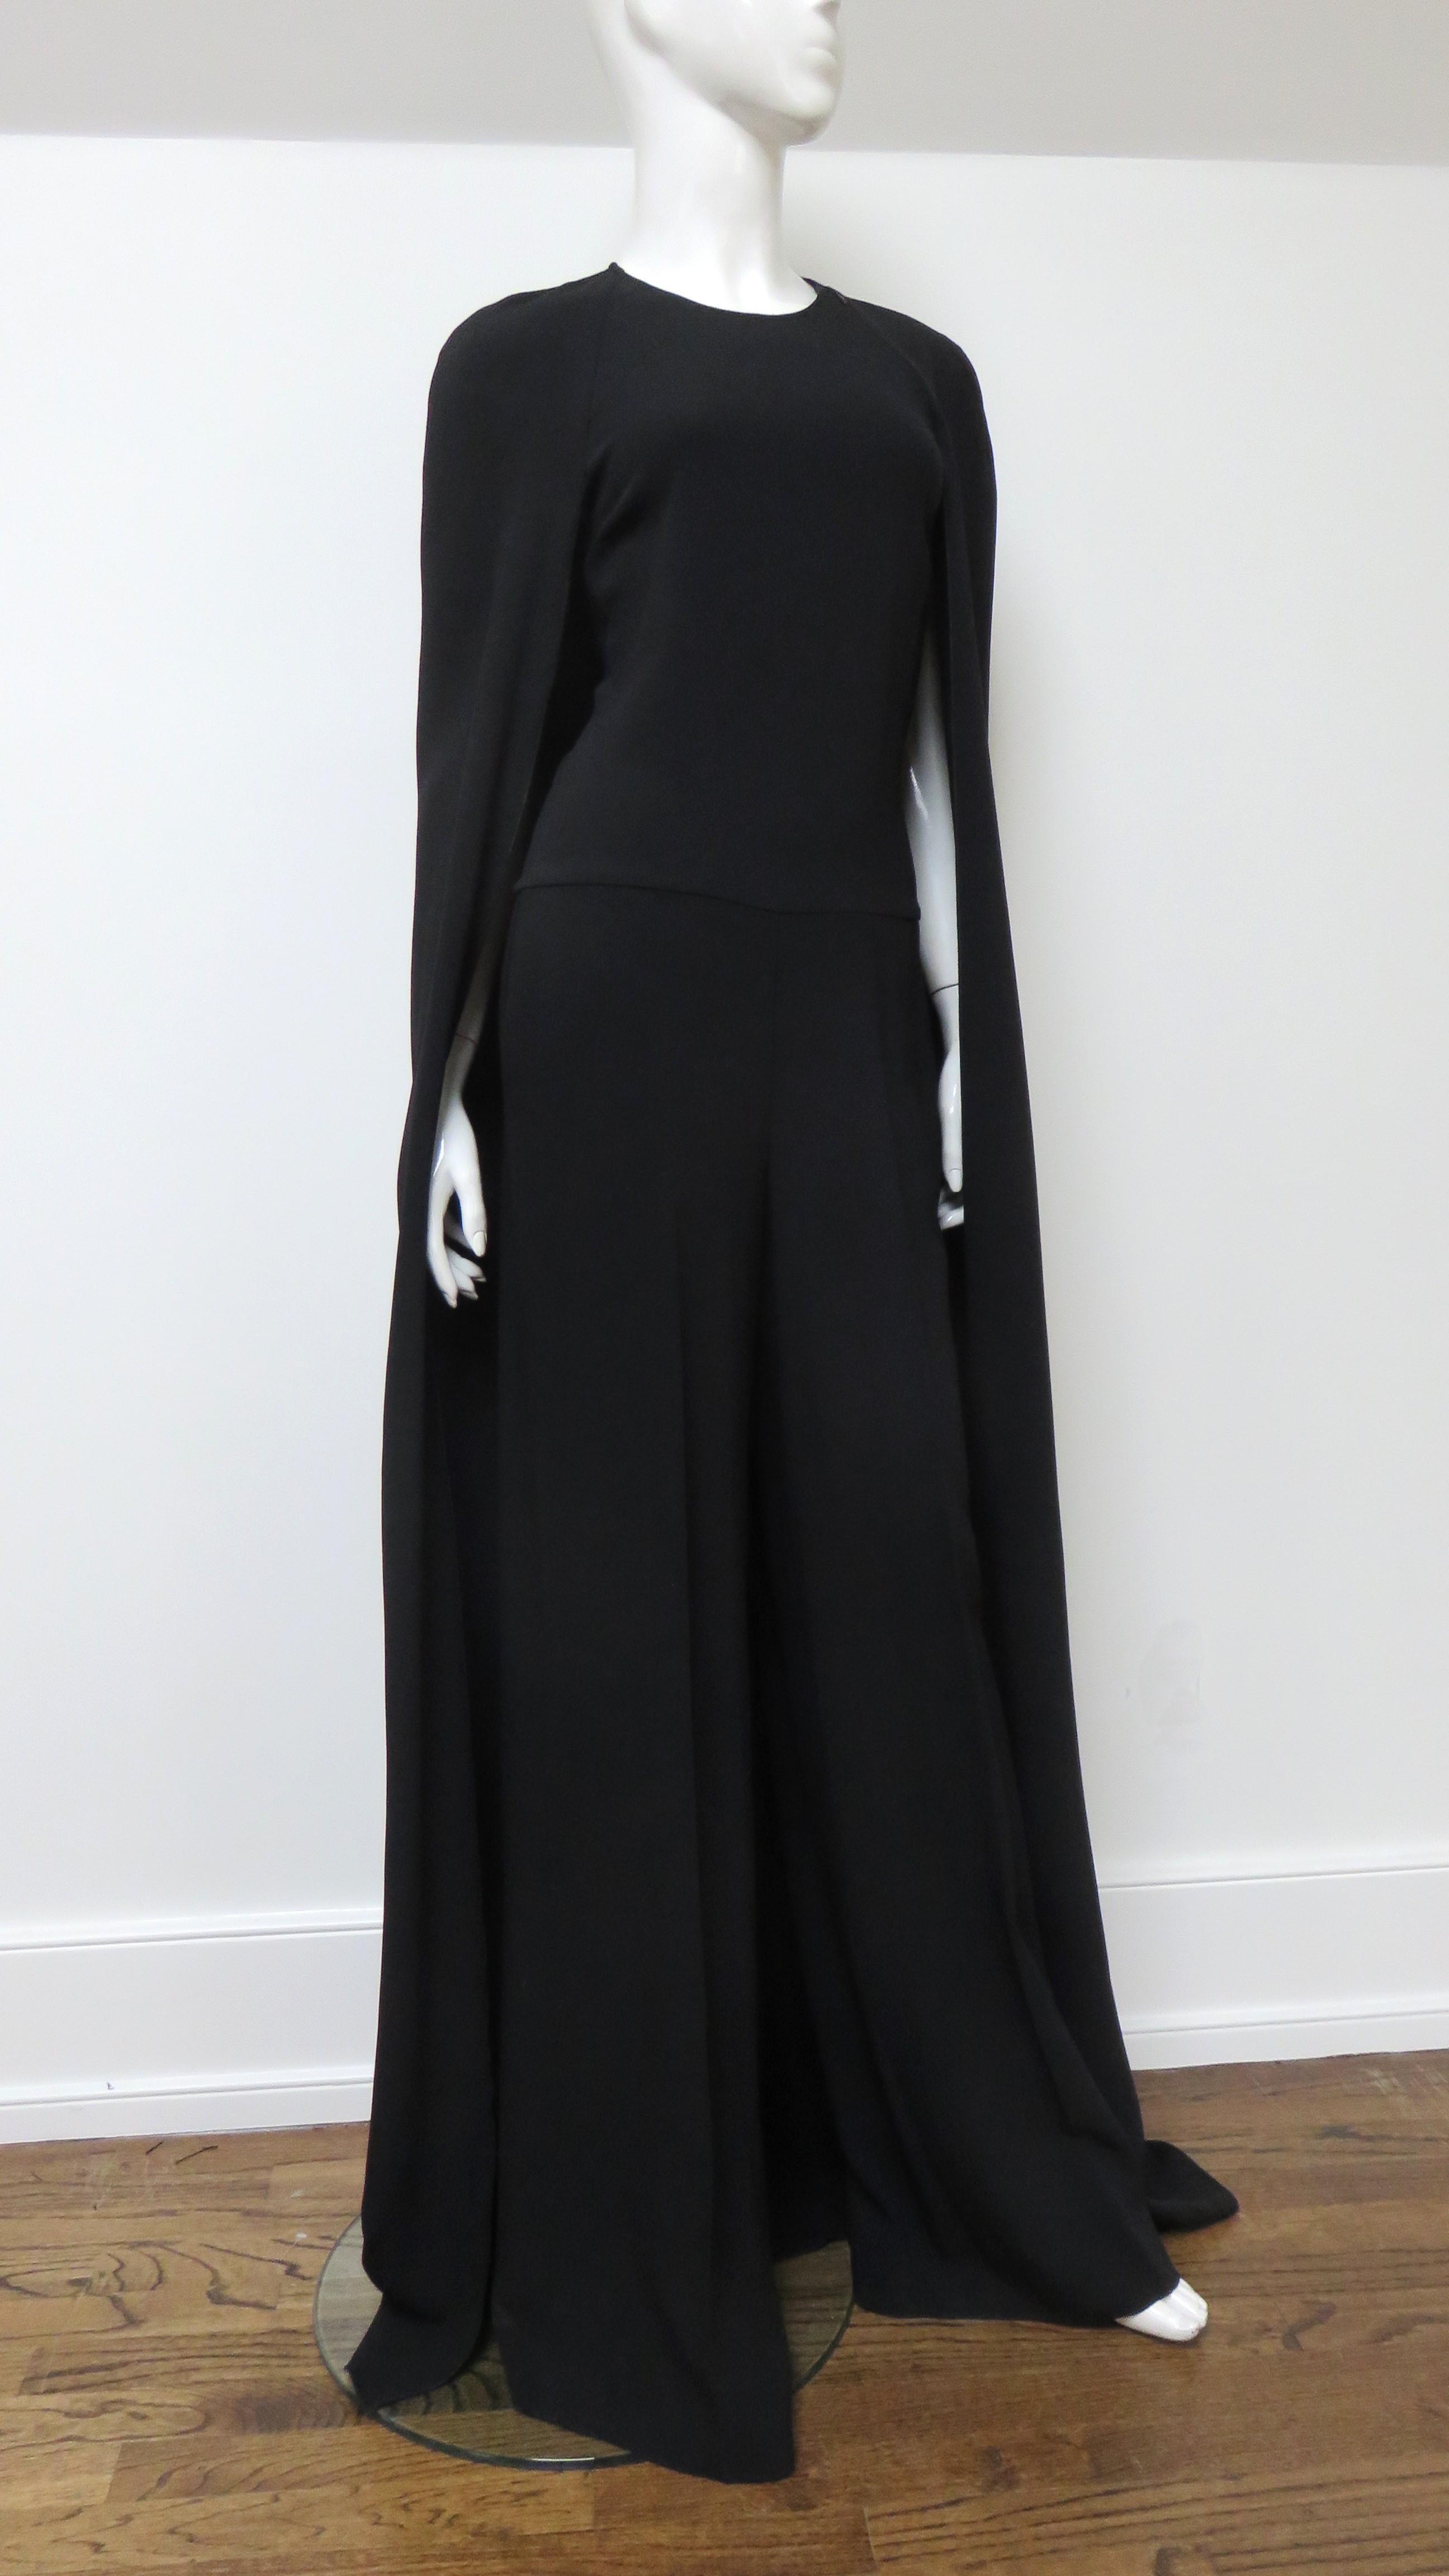 A fabulous black with a bit of stretch silky jumpsuit by Stella McCartney.  It is sleeveless, has a crew neckline and full legs with hip side seam pockets. An attached cape drapes over the shoulders, arms and back the length of the jumpsuit. There